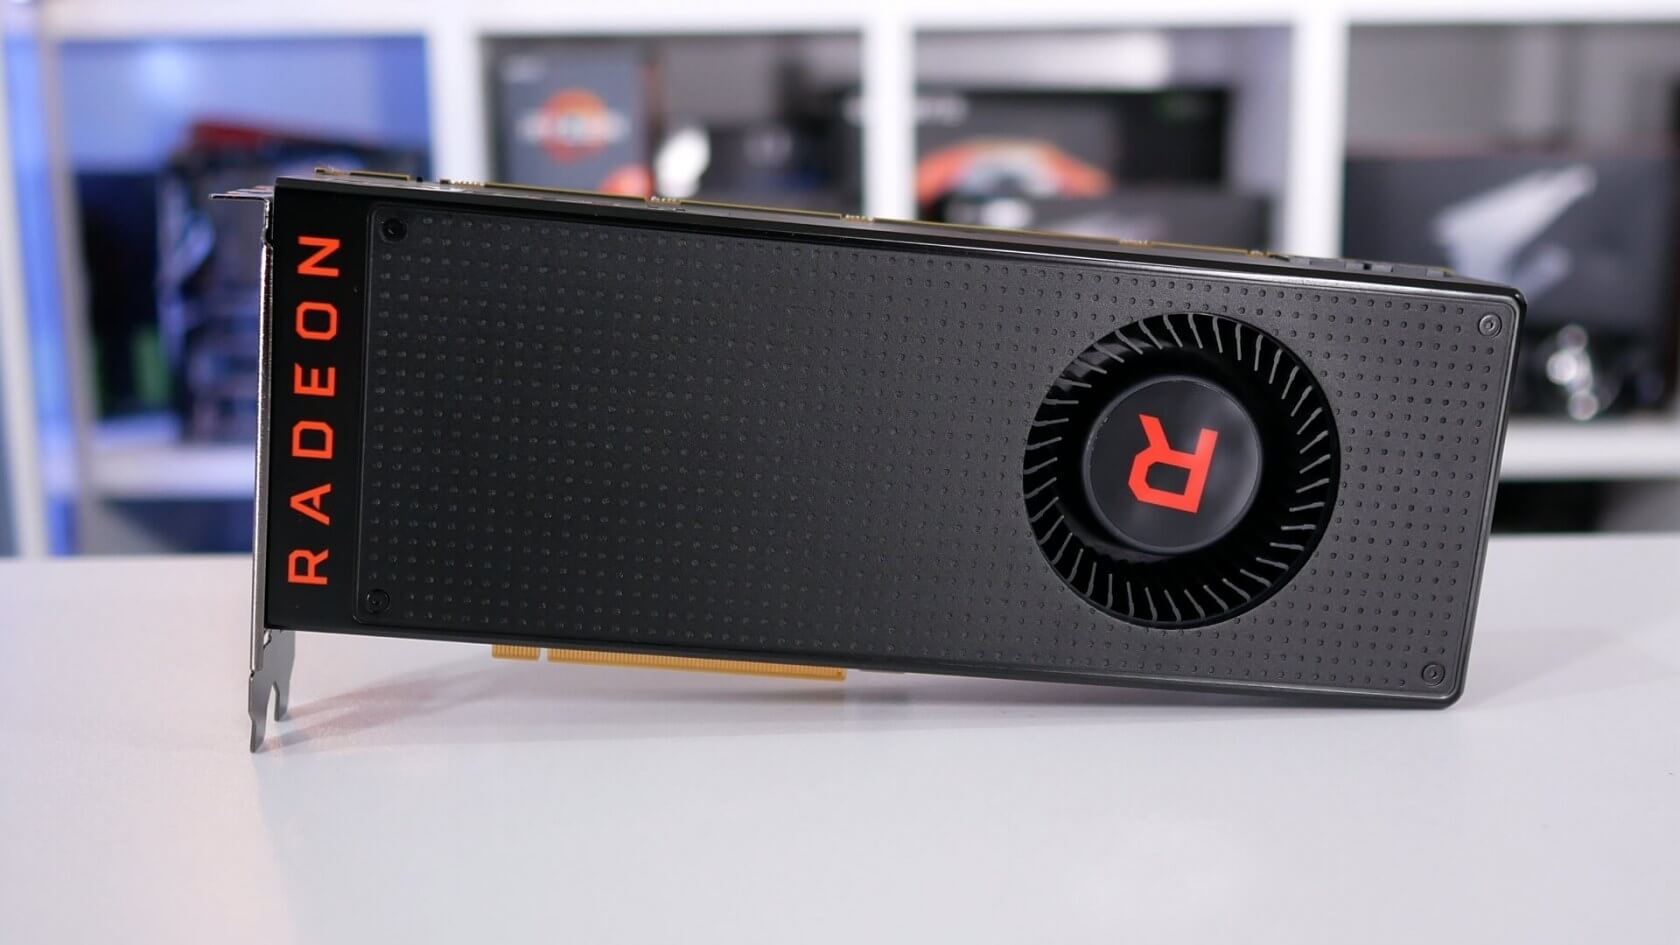 Rumor: AMD to unveil next-gen RDNA 2 GPU with ray tracing support at CES 2020